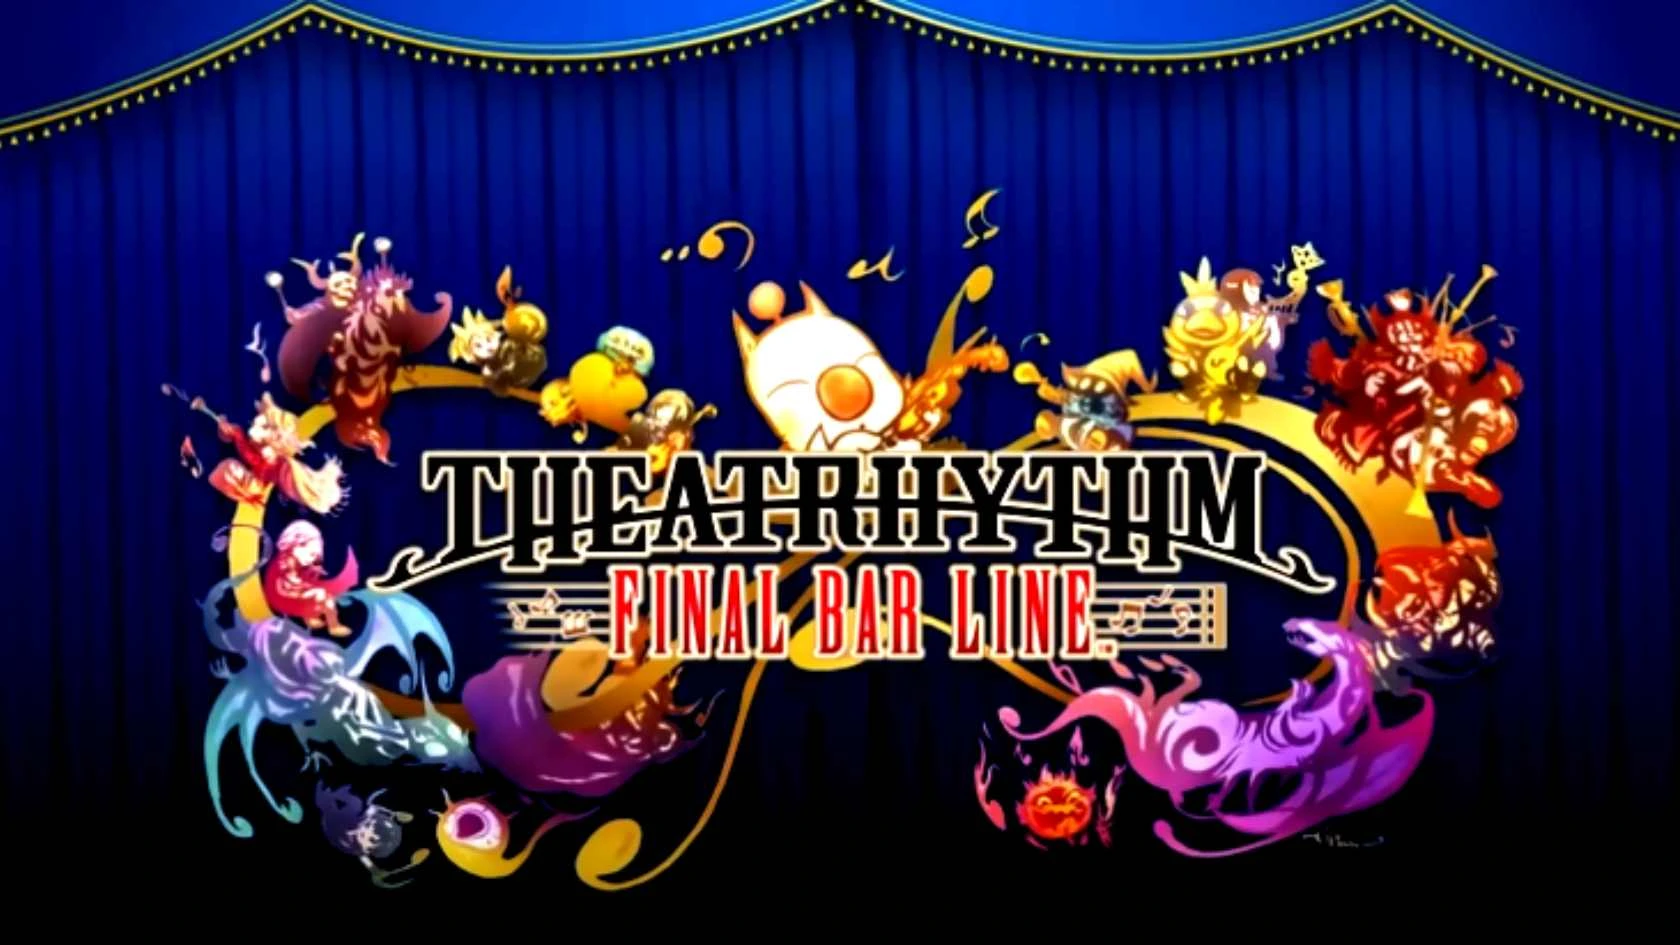 Theatrhythm Final Bar Line Parents Guide and Age Rating 2023